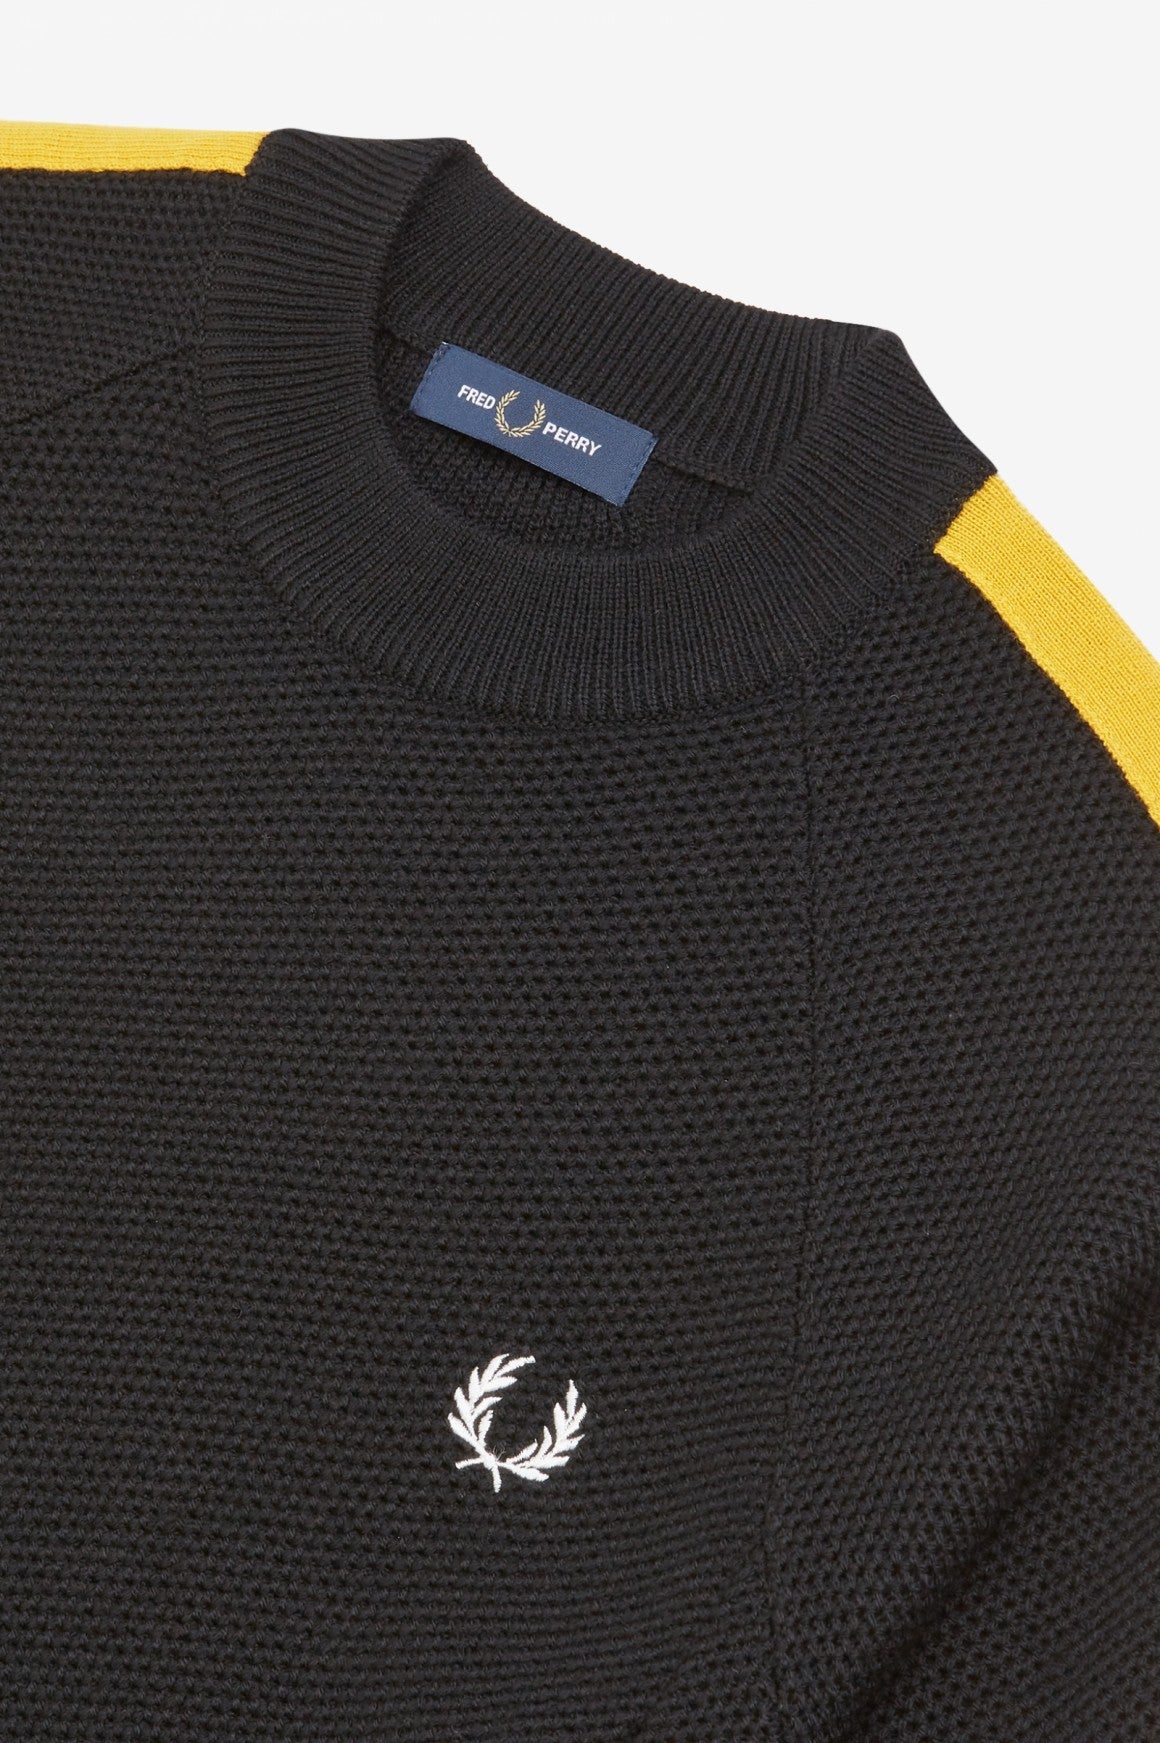 Tipped Sleeve Crew Neck Jumper